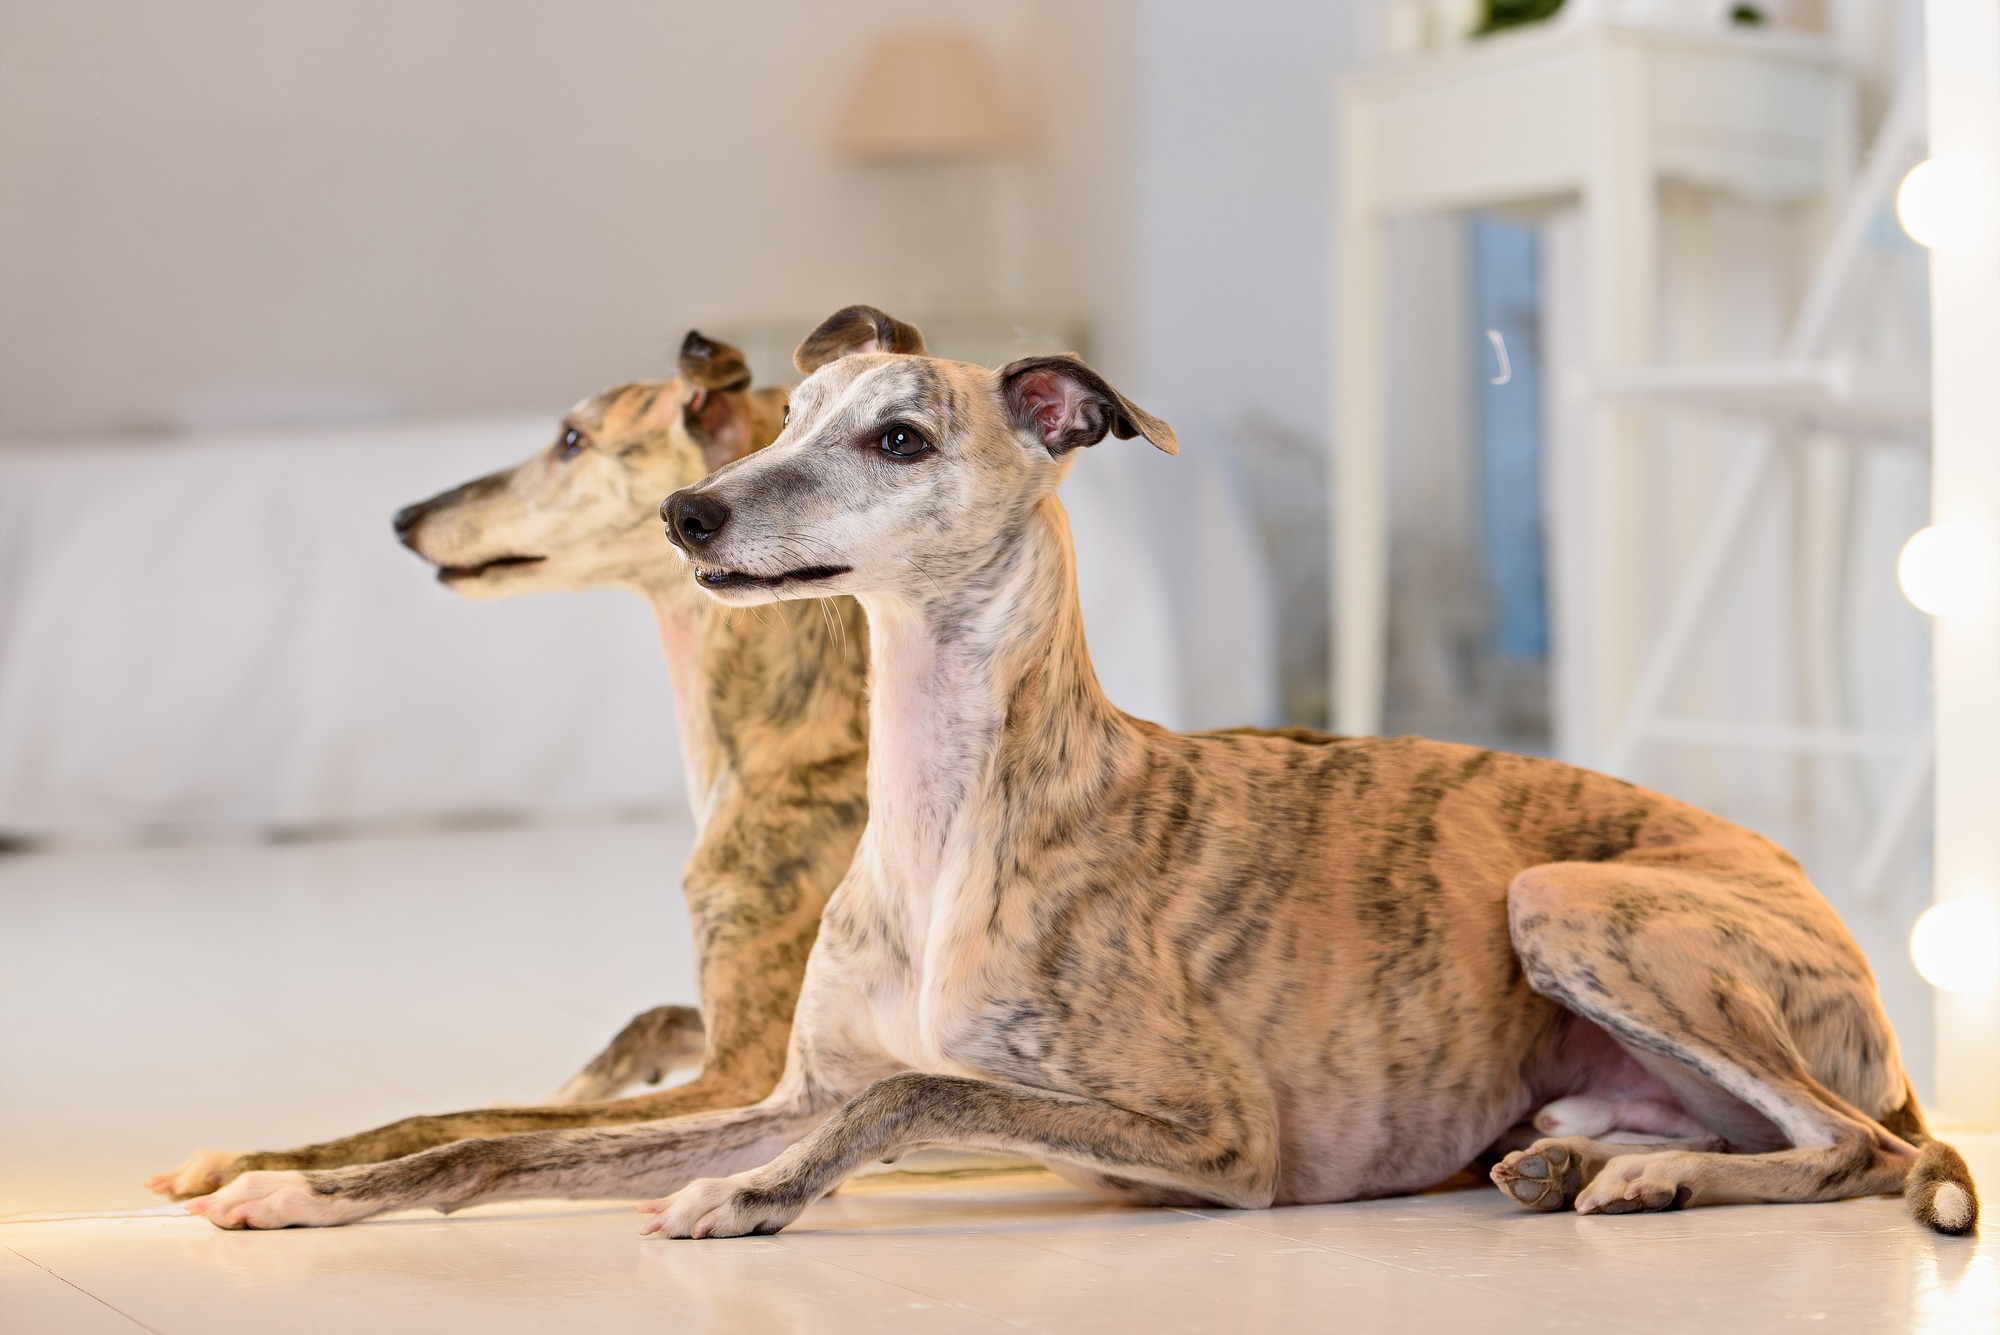 Two whippet